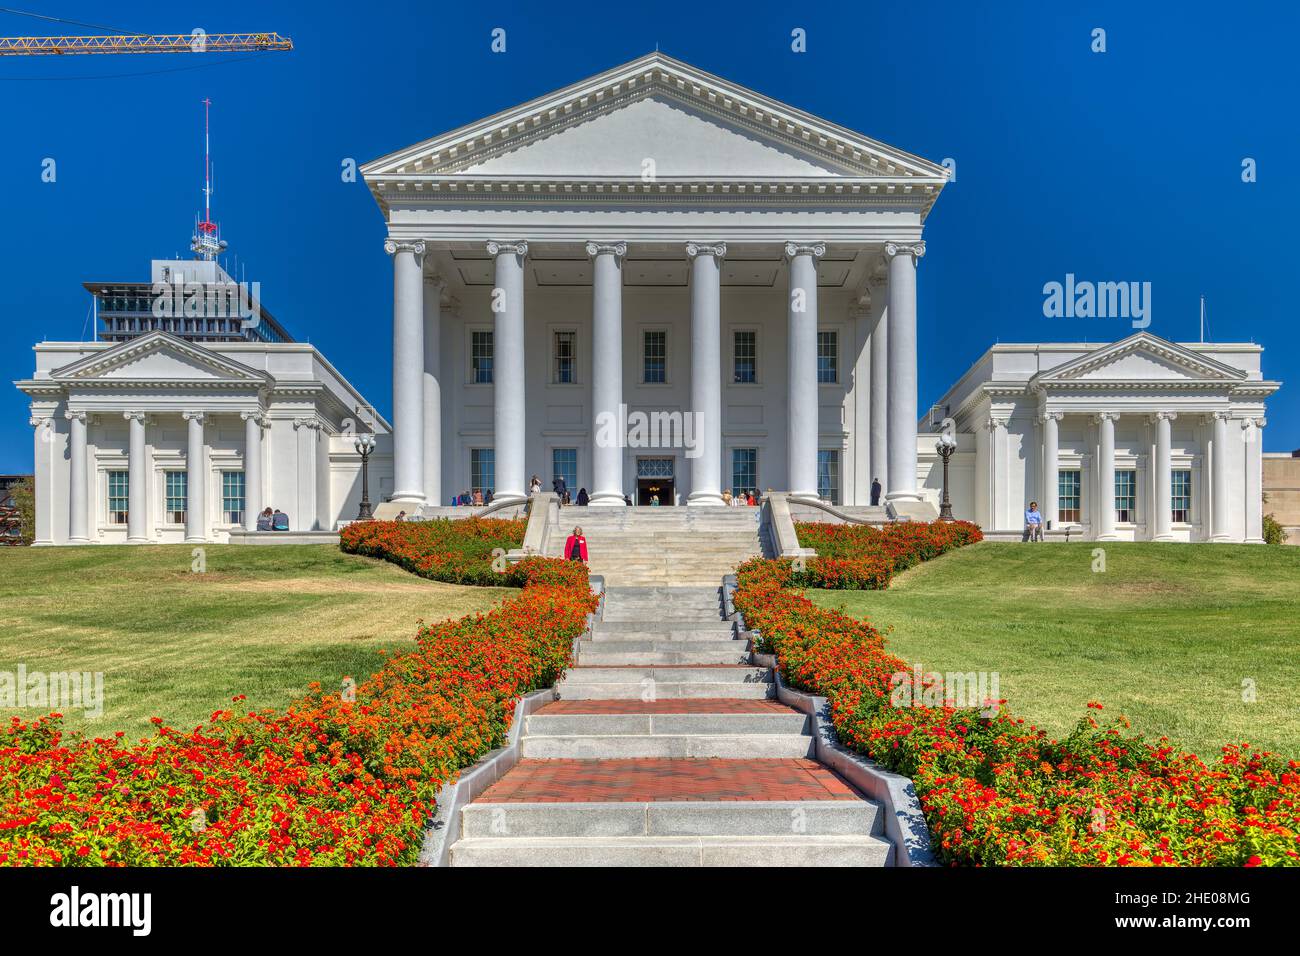 The Virginia State Capitol core, designed by Thomas Jefferson, has an internal, not external, dome. Stock Photo